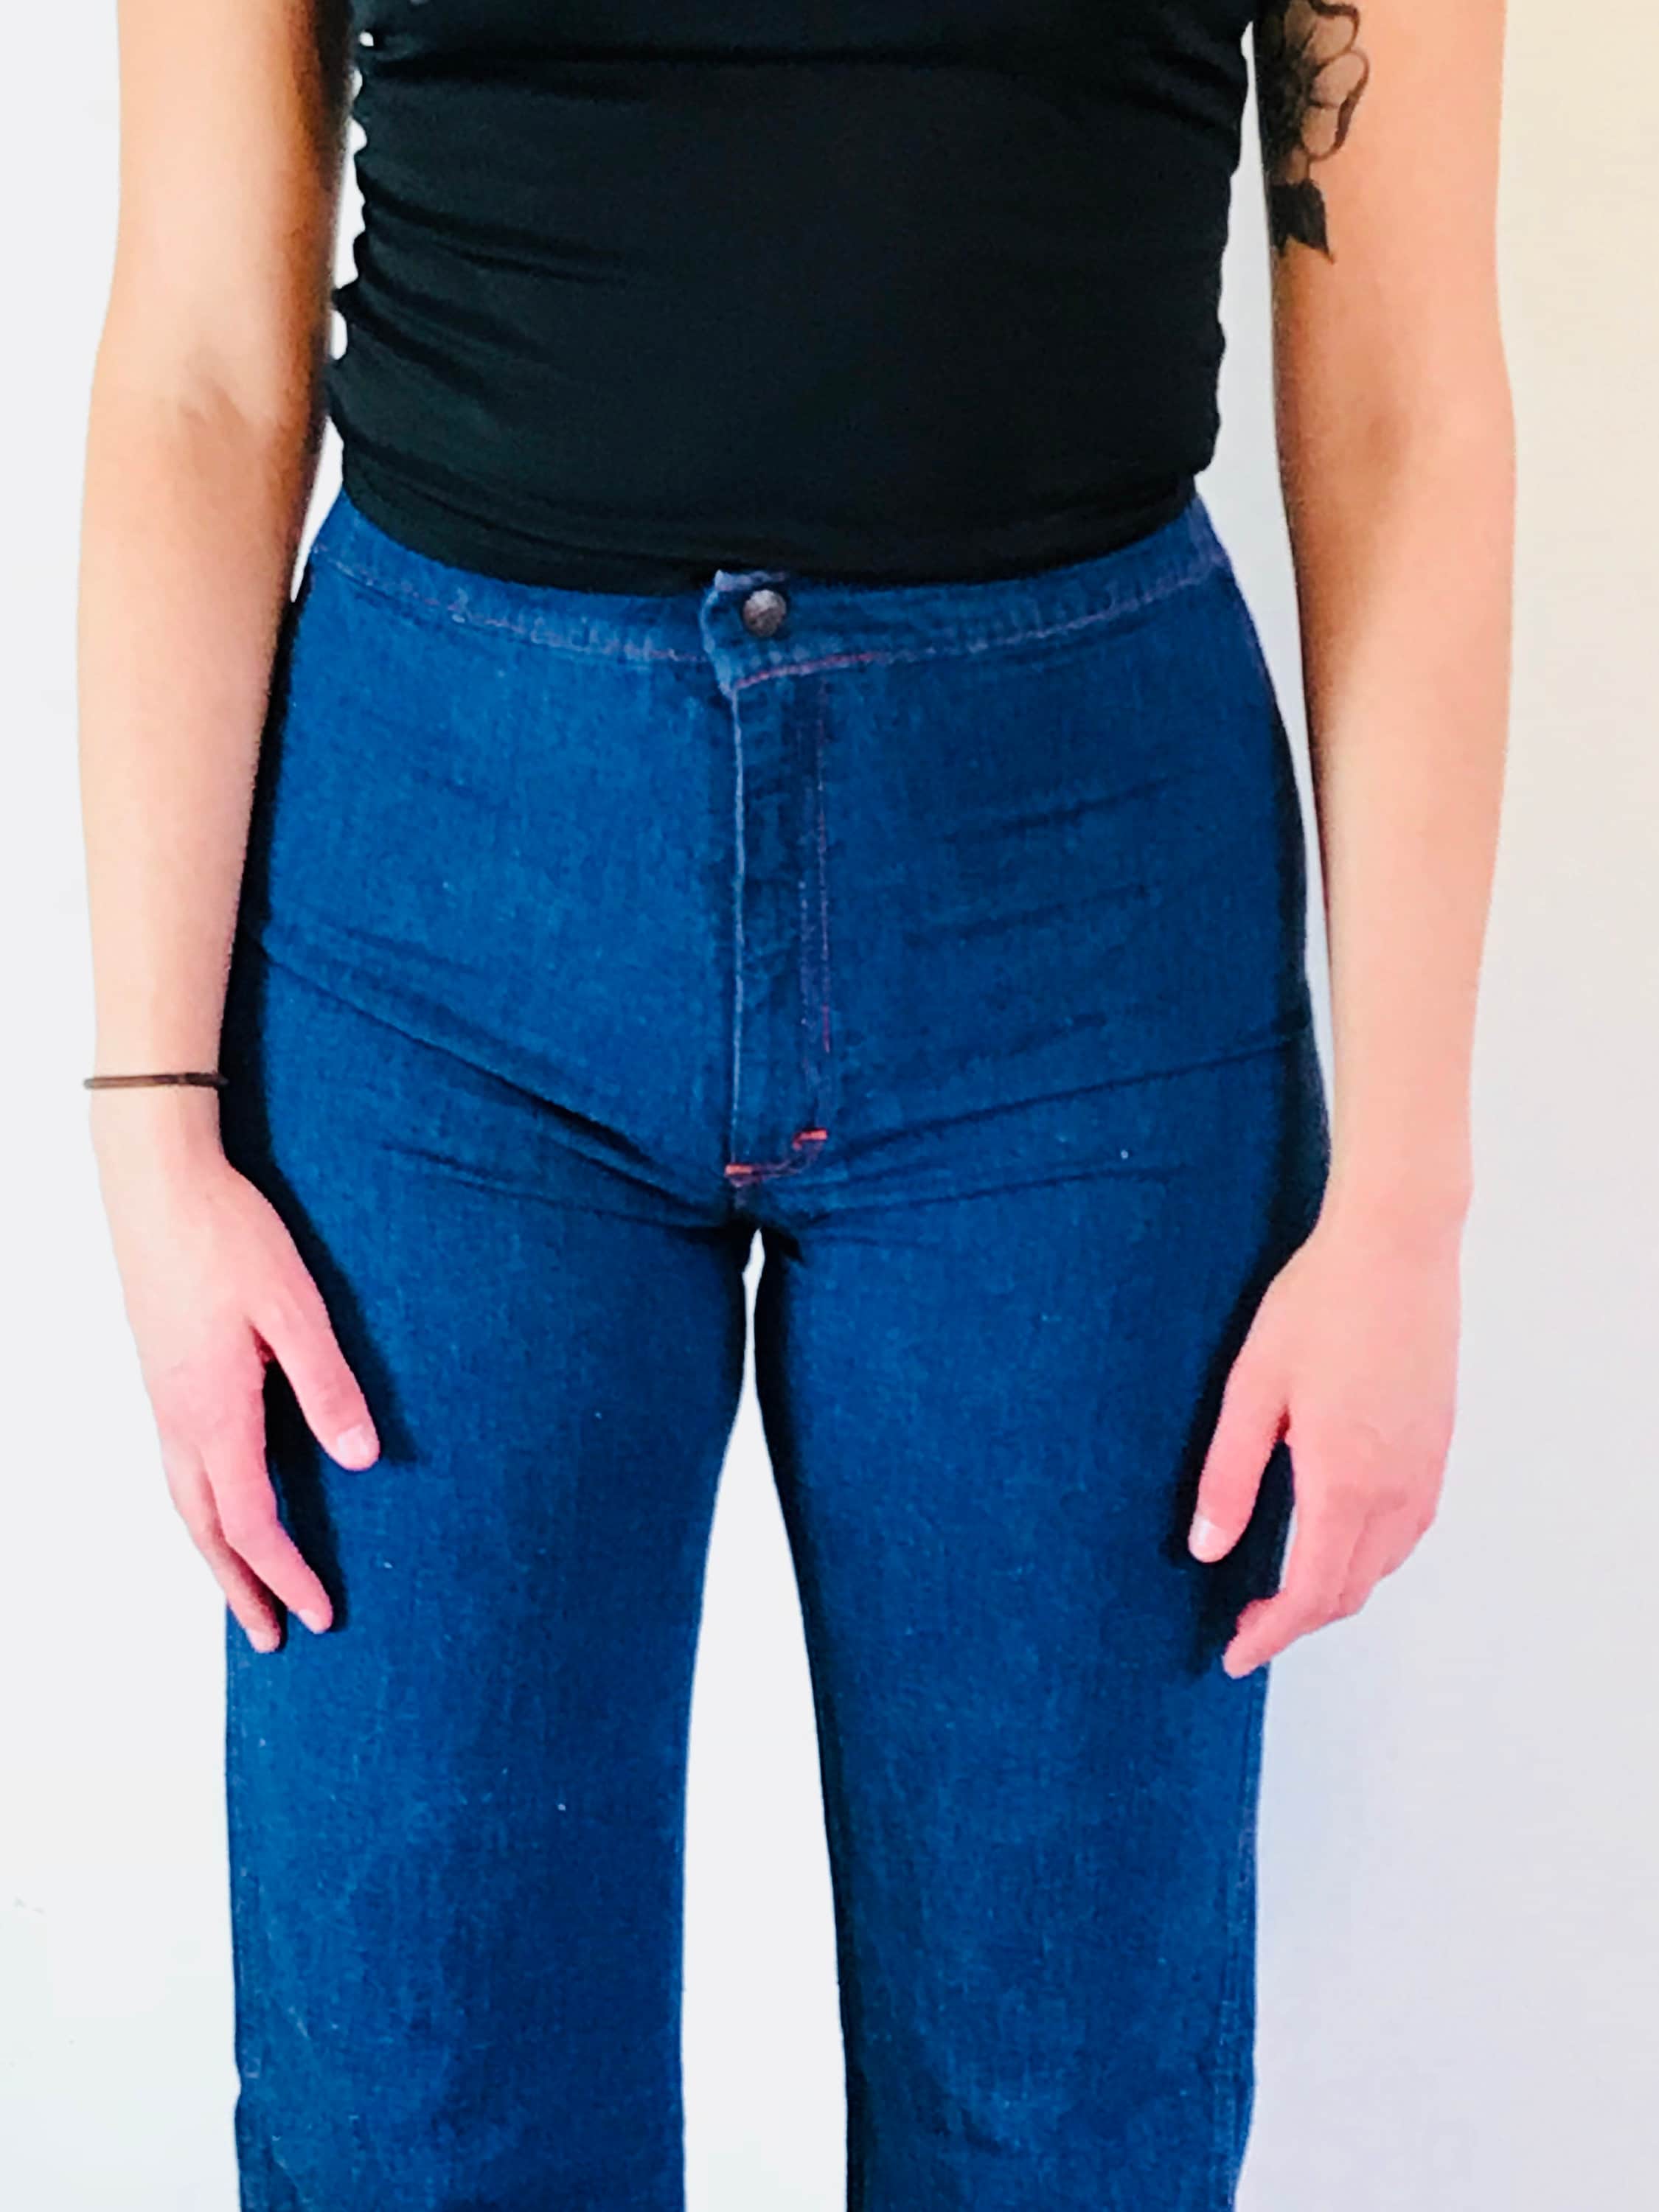 Vintage 70s Jeans, Super High Waisted, MONTGOMERY WARD, Tight Disco Pants, 1970s  Blue Jeans, Dark Wash Denim, High rise jeans, Wedgie Jeans